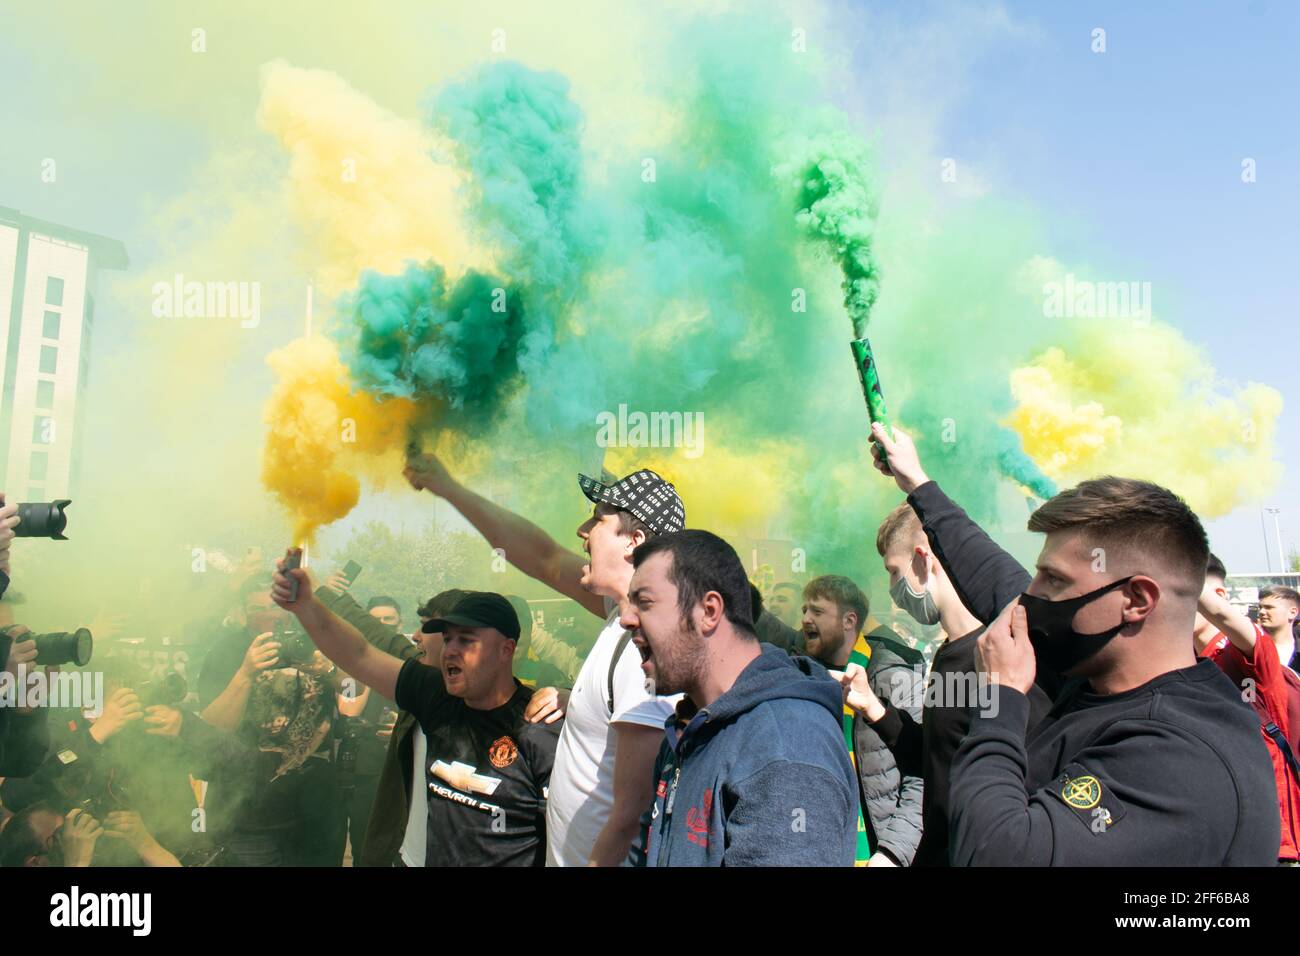 Protest against Glazer at Old Trafford football ground. Supporters holding green and gold smoke flare. Manchester United stadium, UK. Stock Photo